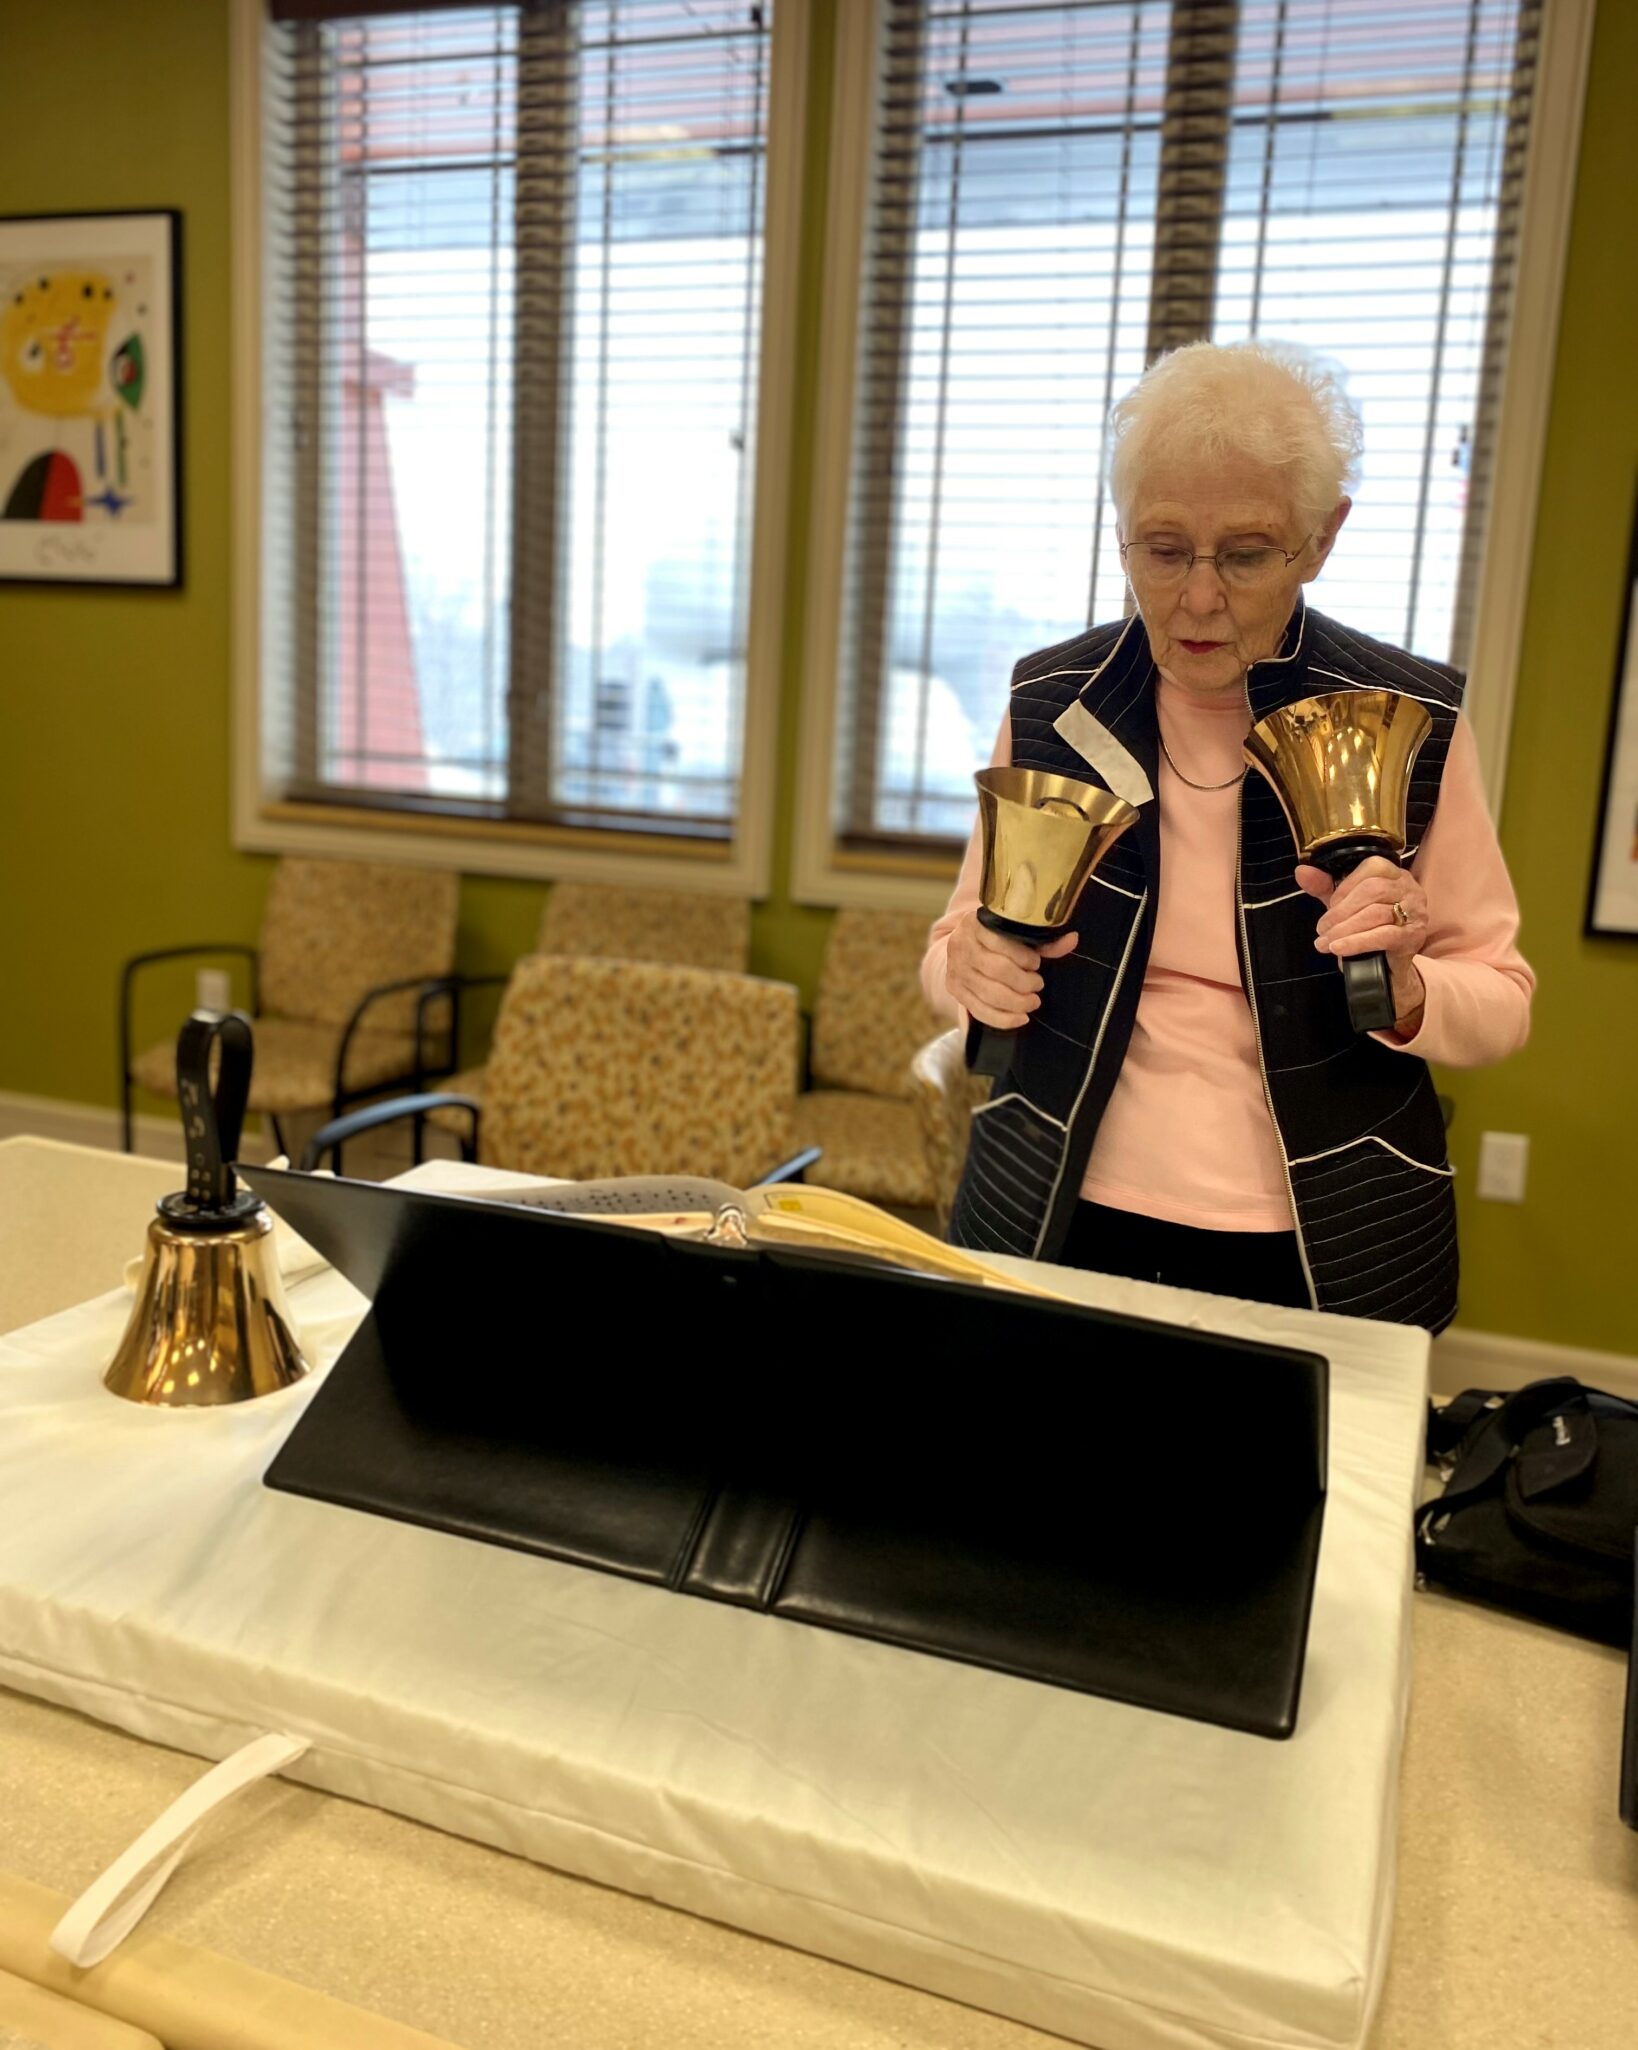 A senior woman looks at her sheet music while holding hand bells, working as part of the Trillium Bells group